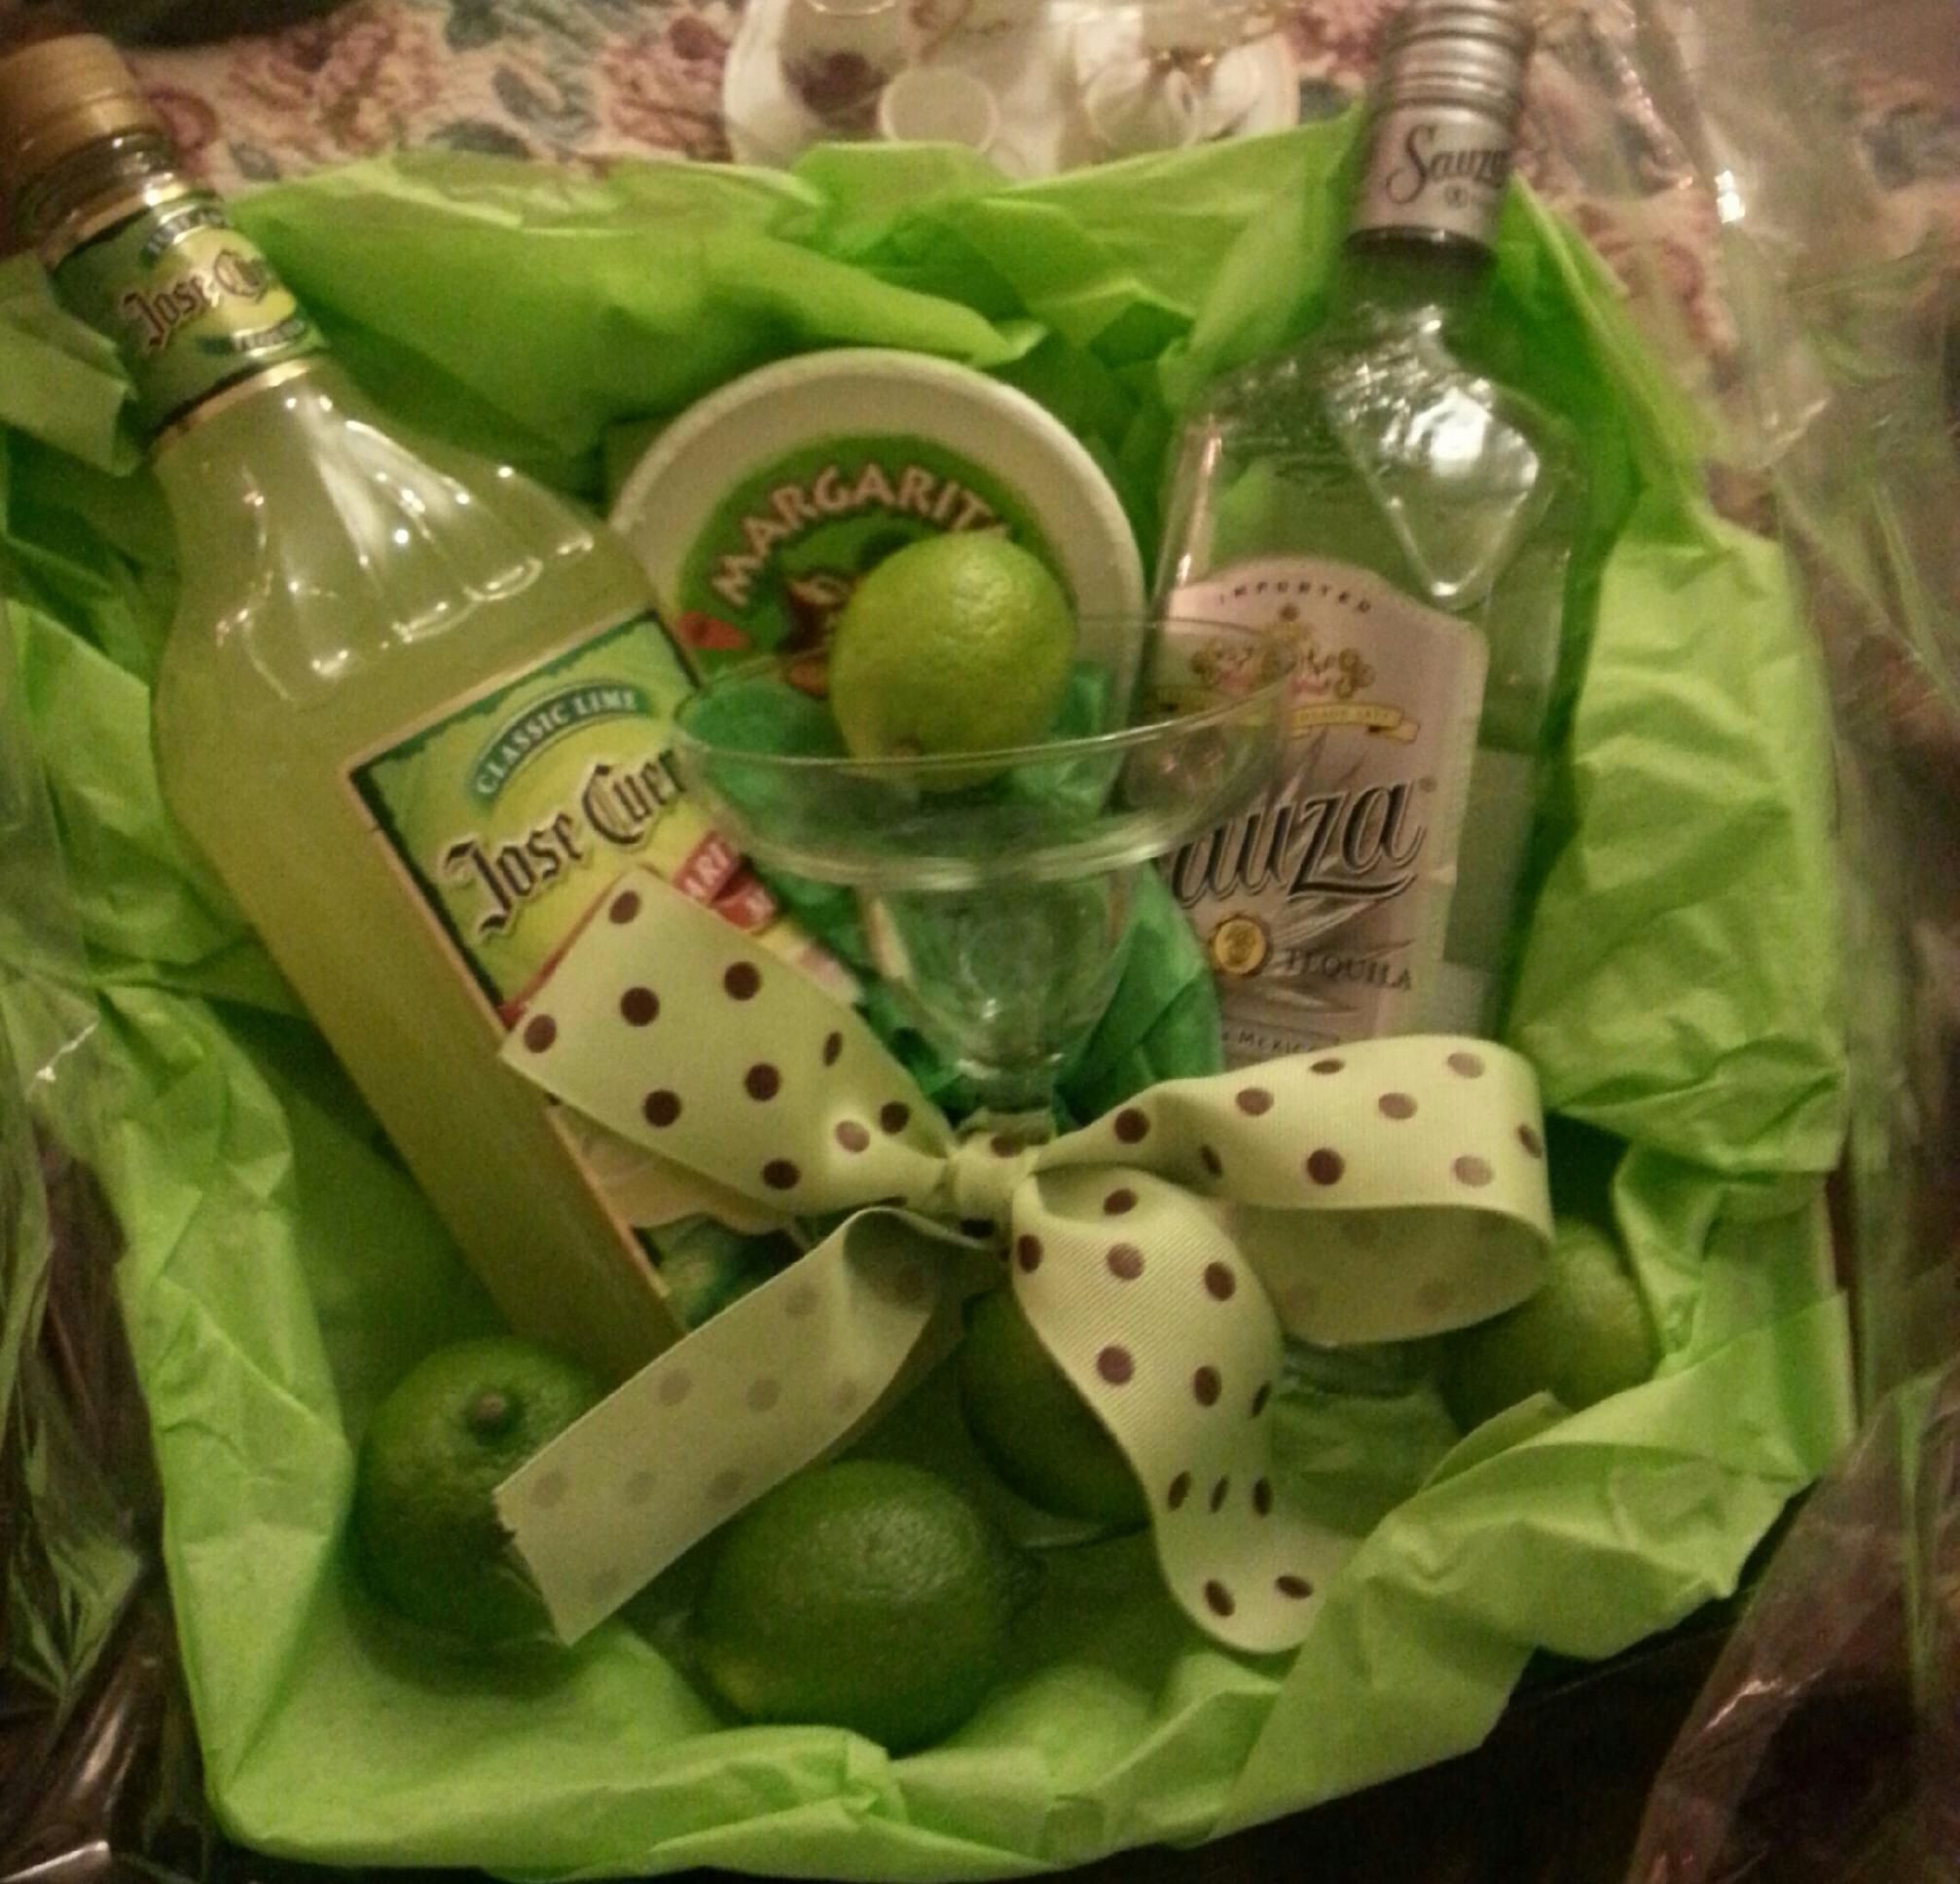 Margarita Gift Baskets Ideas
 Hilarious And Awkward White Elephant Gift Ideas That Are